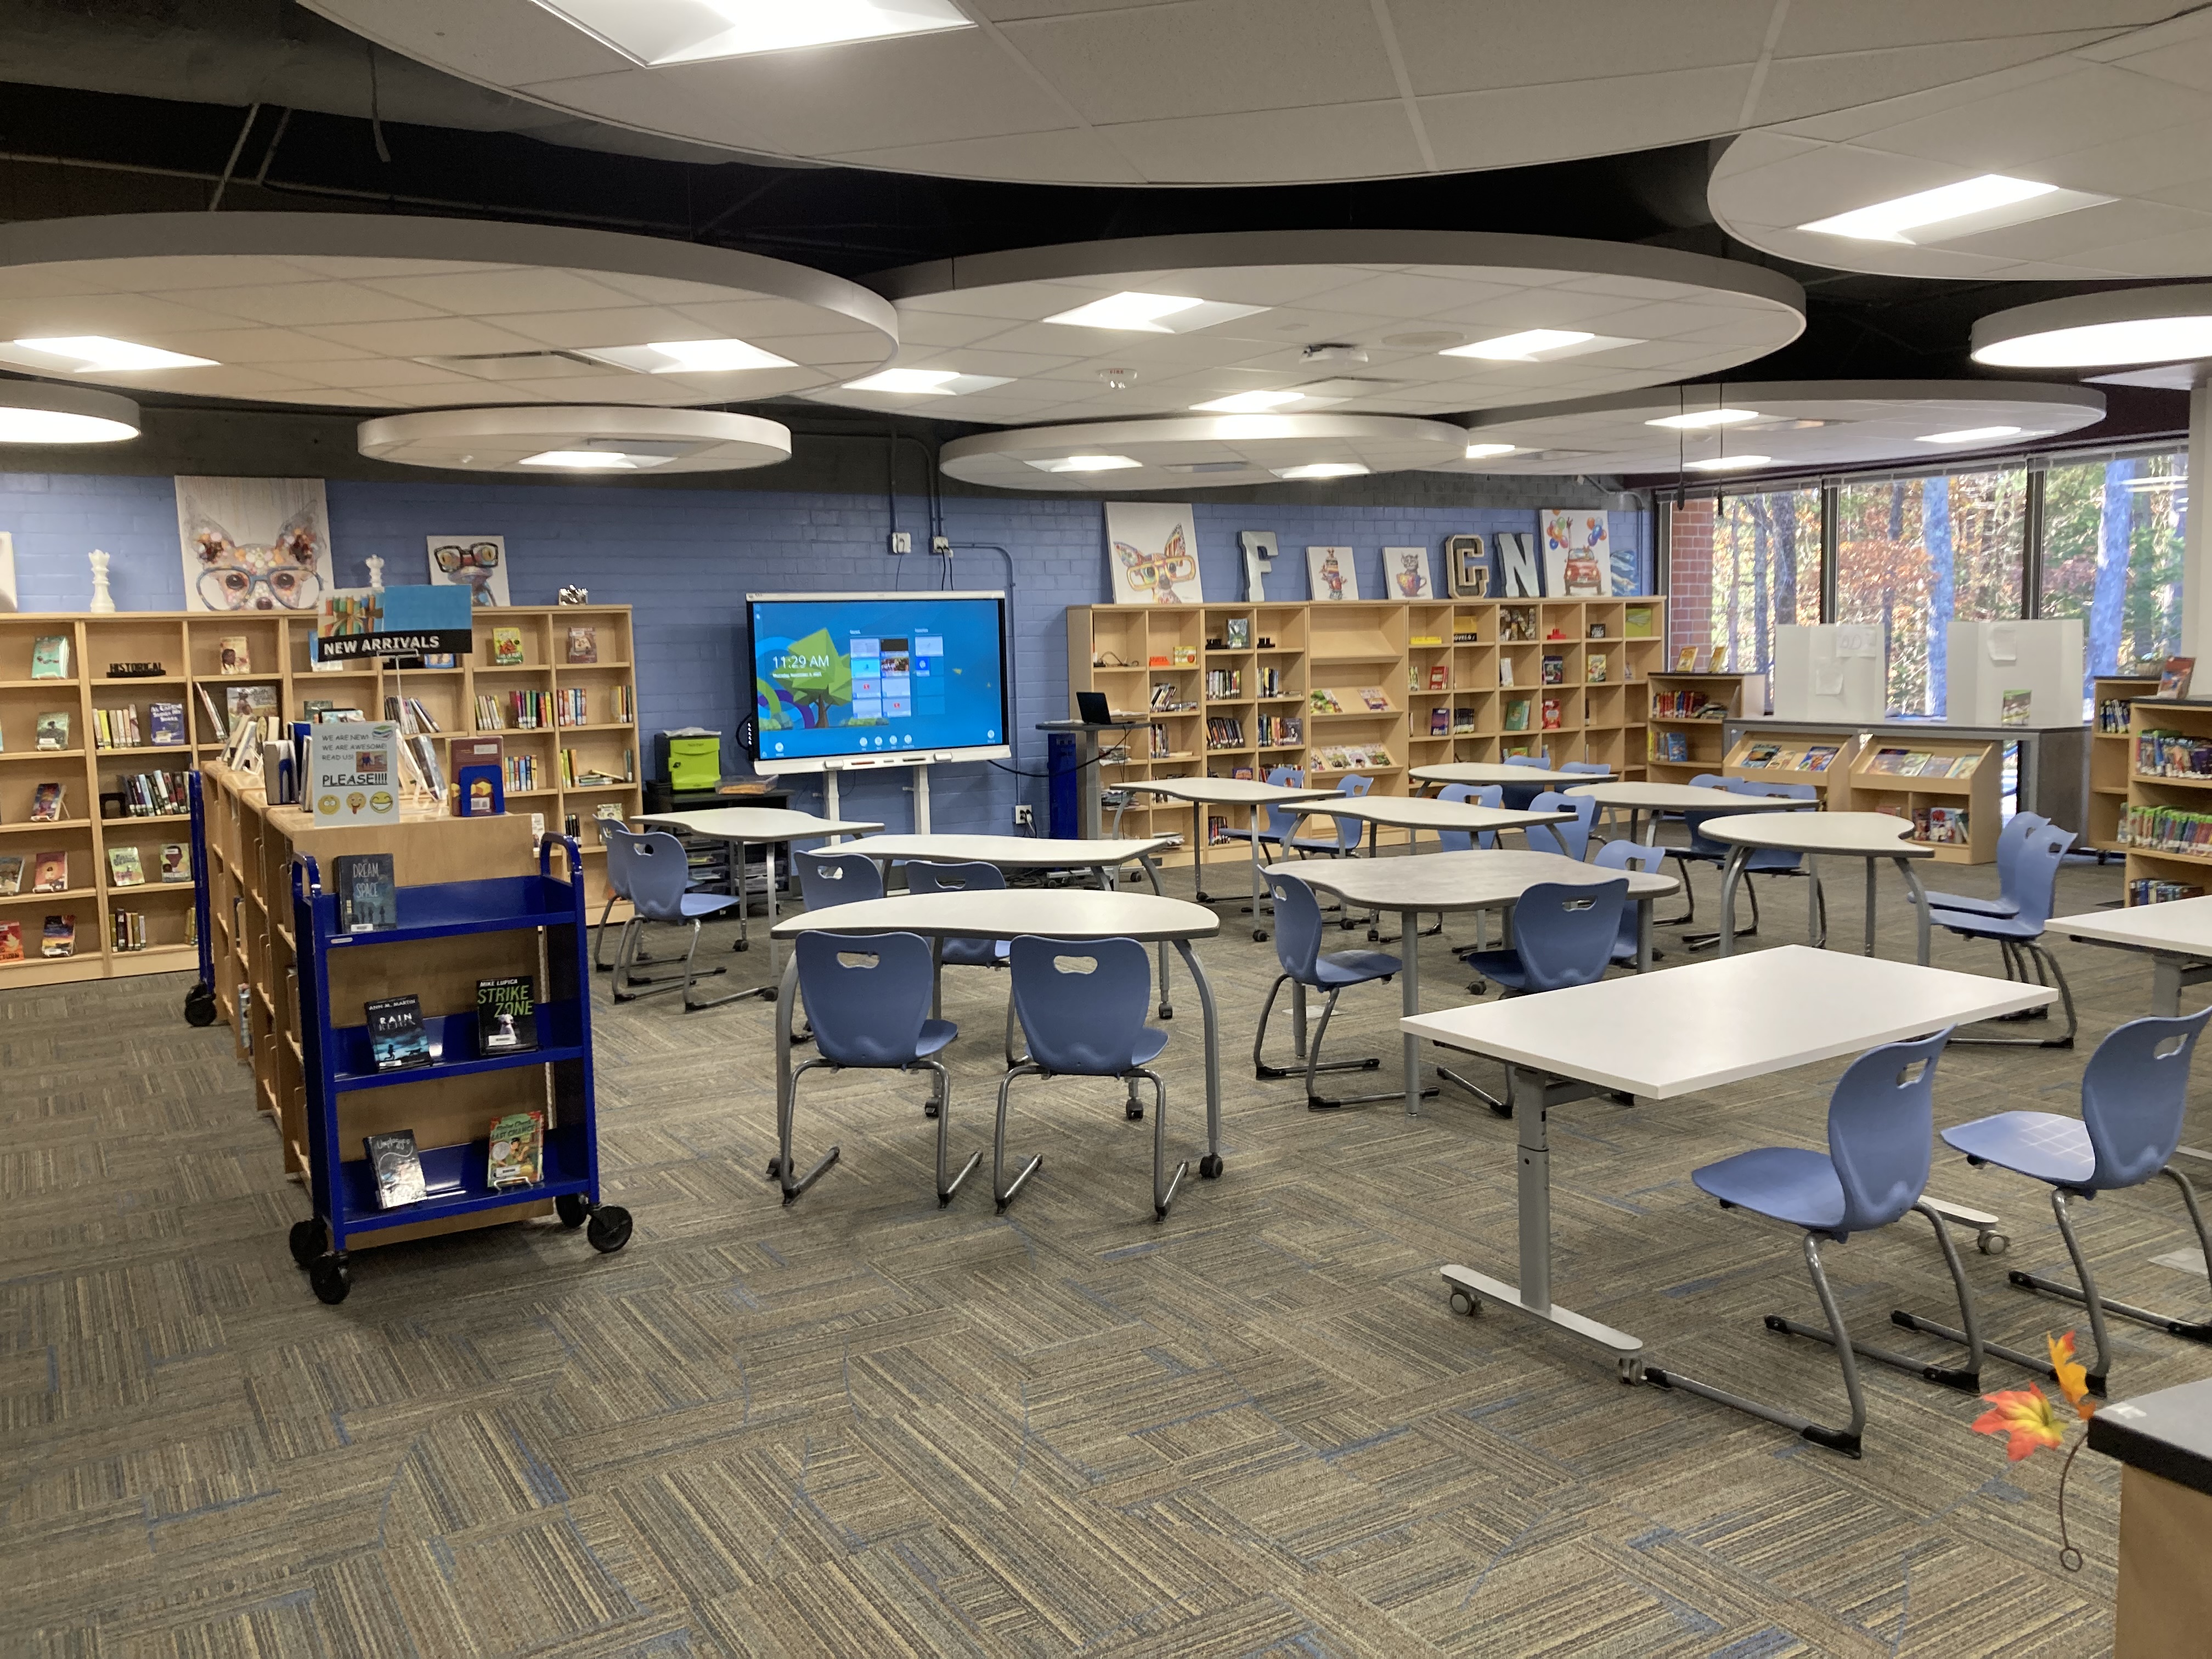 The media center at HCES